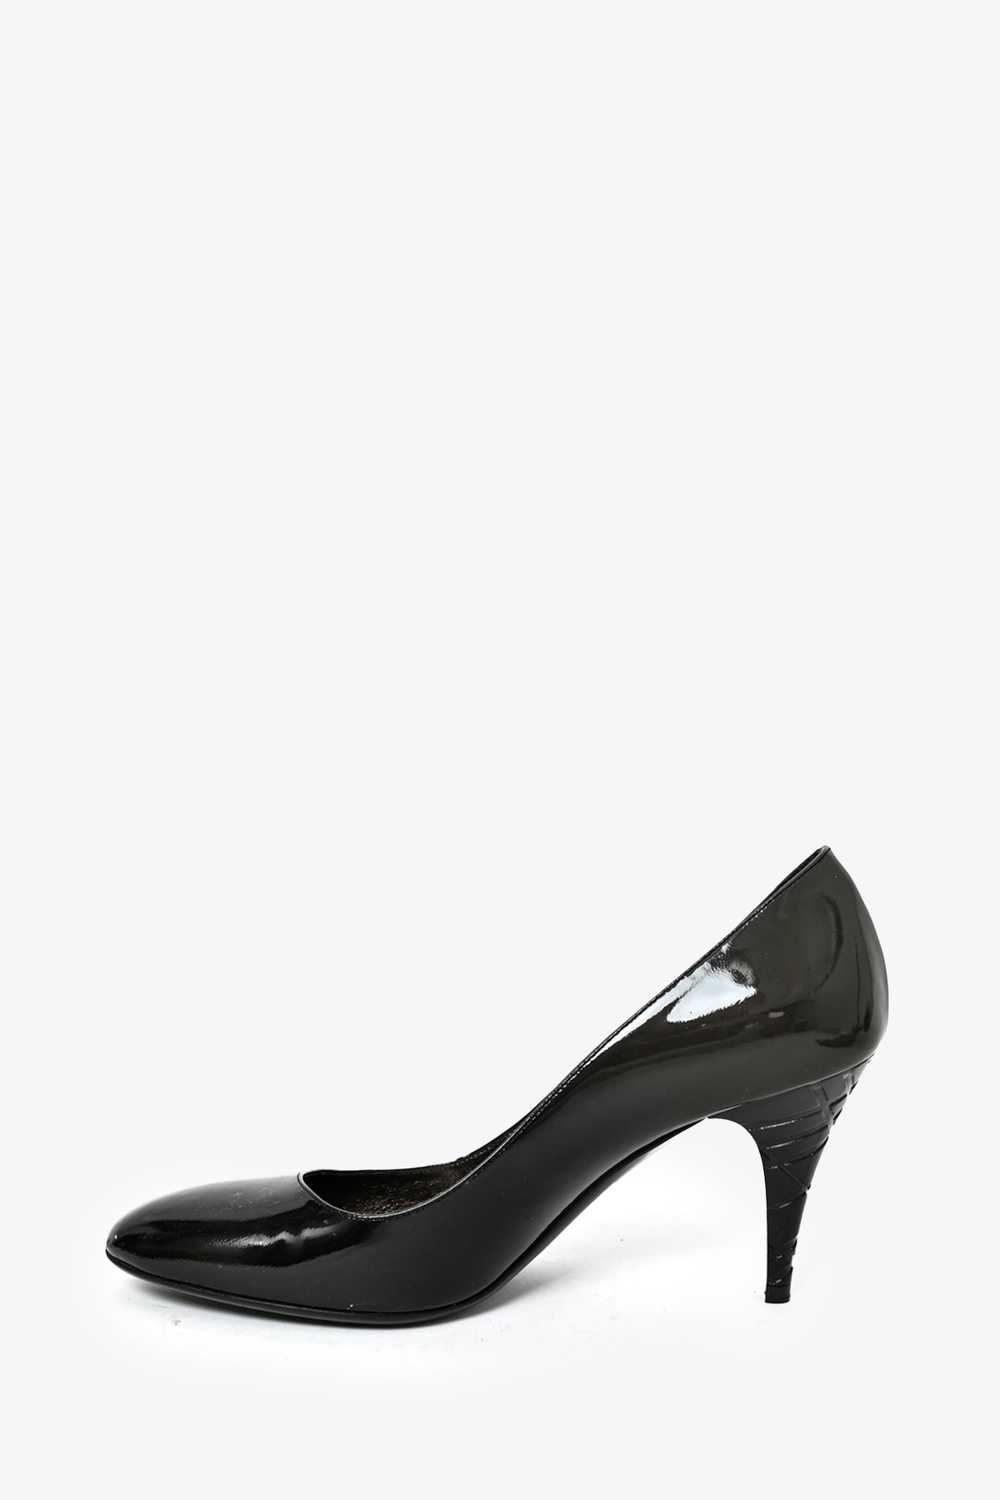 Burberry Black/Grey Patent Leather Heels Size 38 - image 4